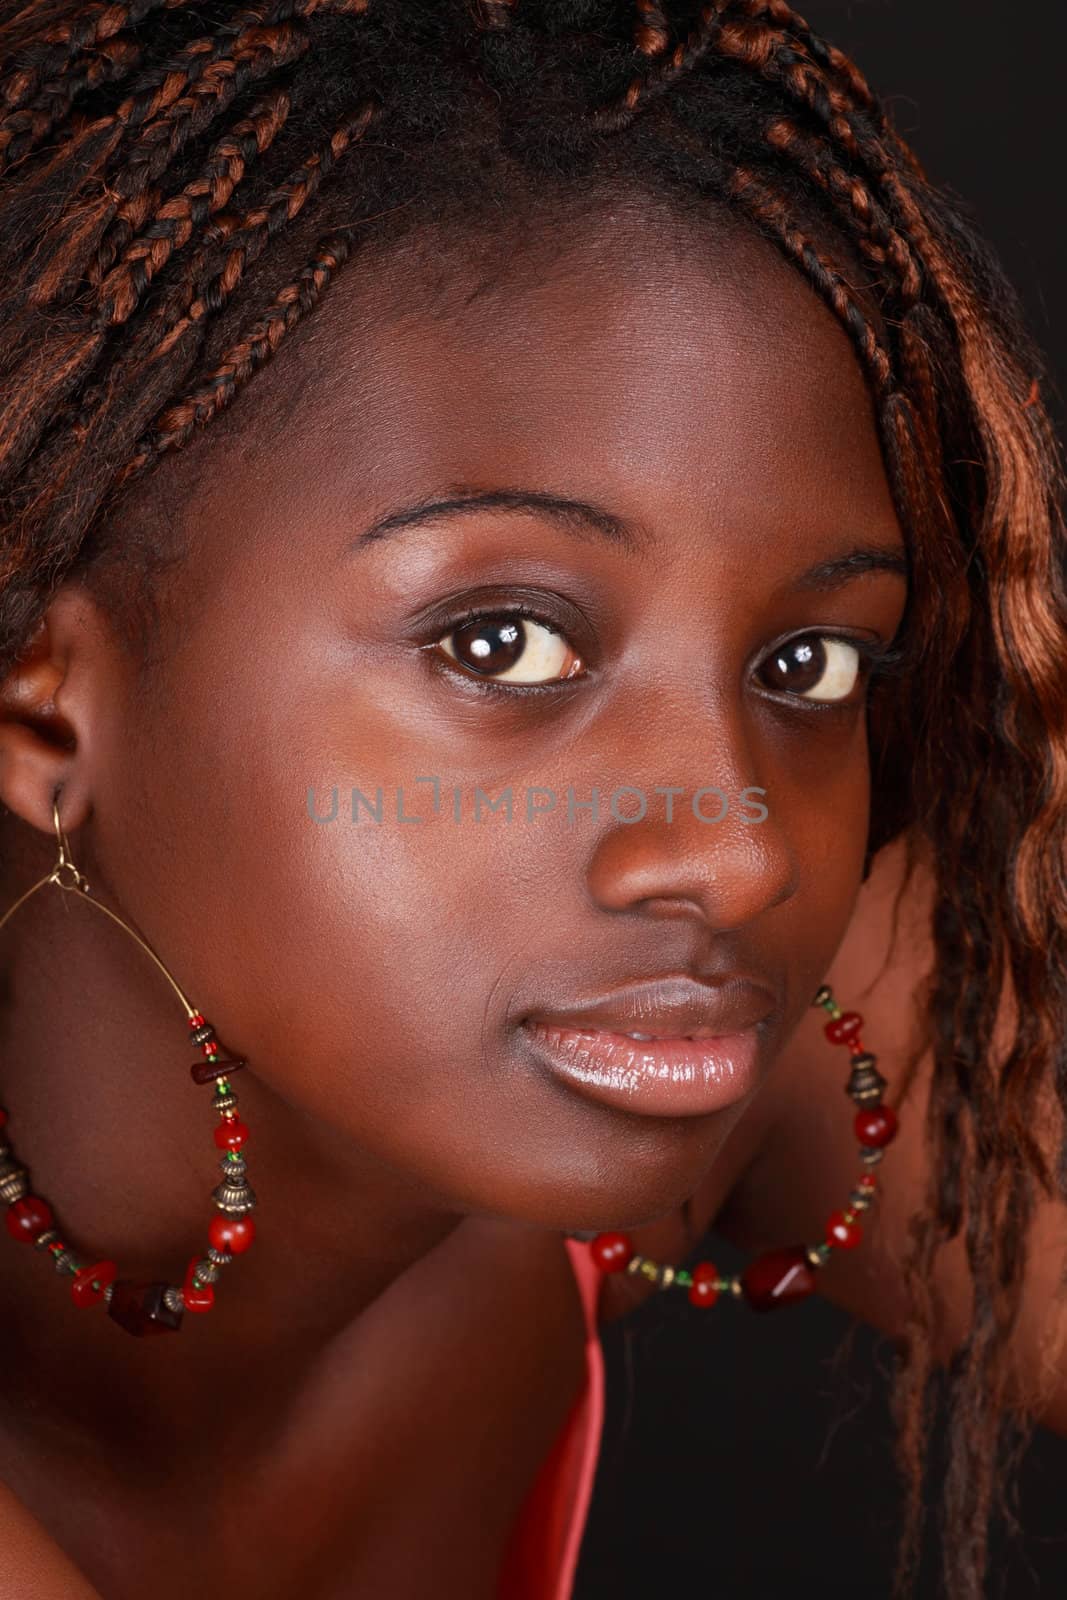 Beautiful african girl by lanalanglois